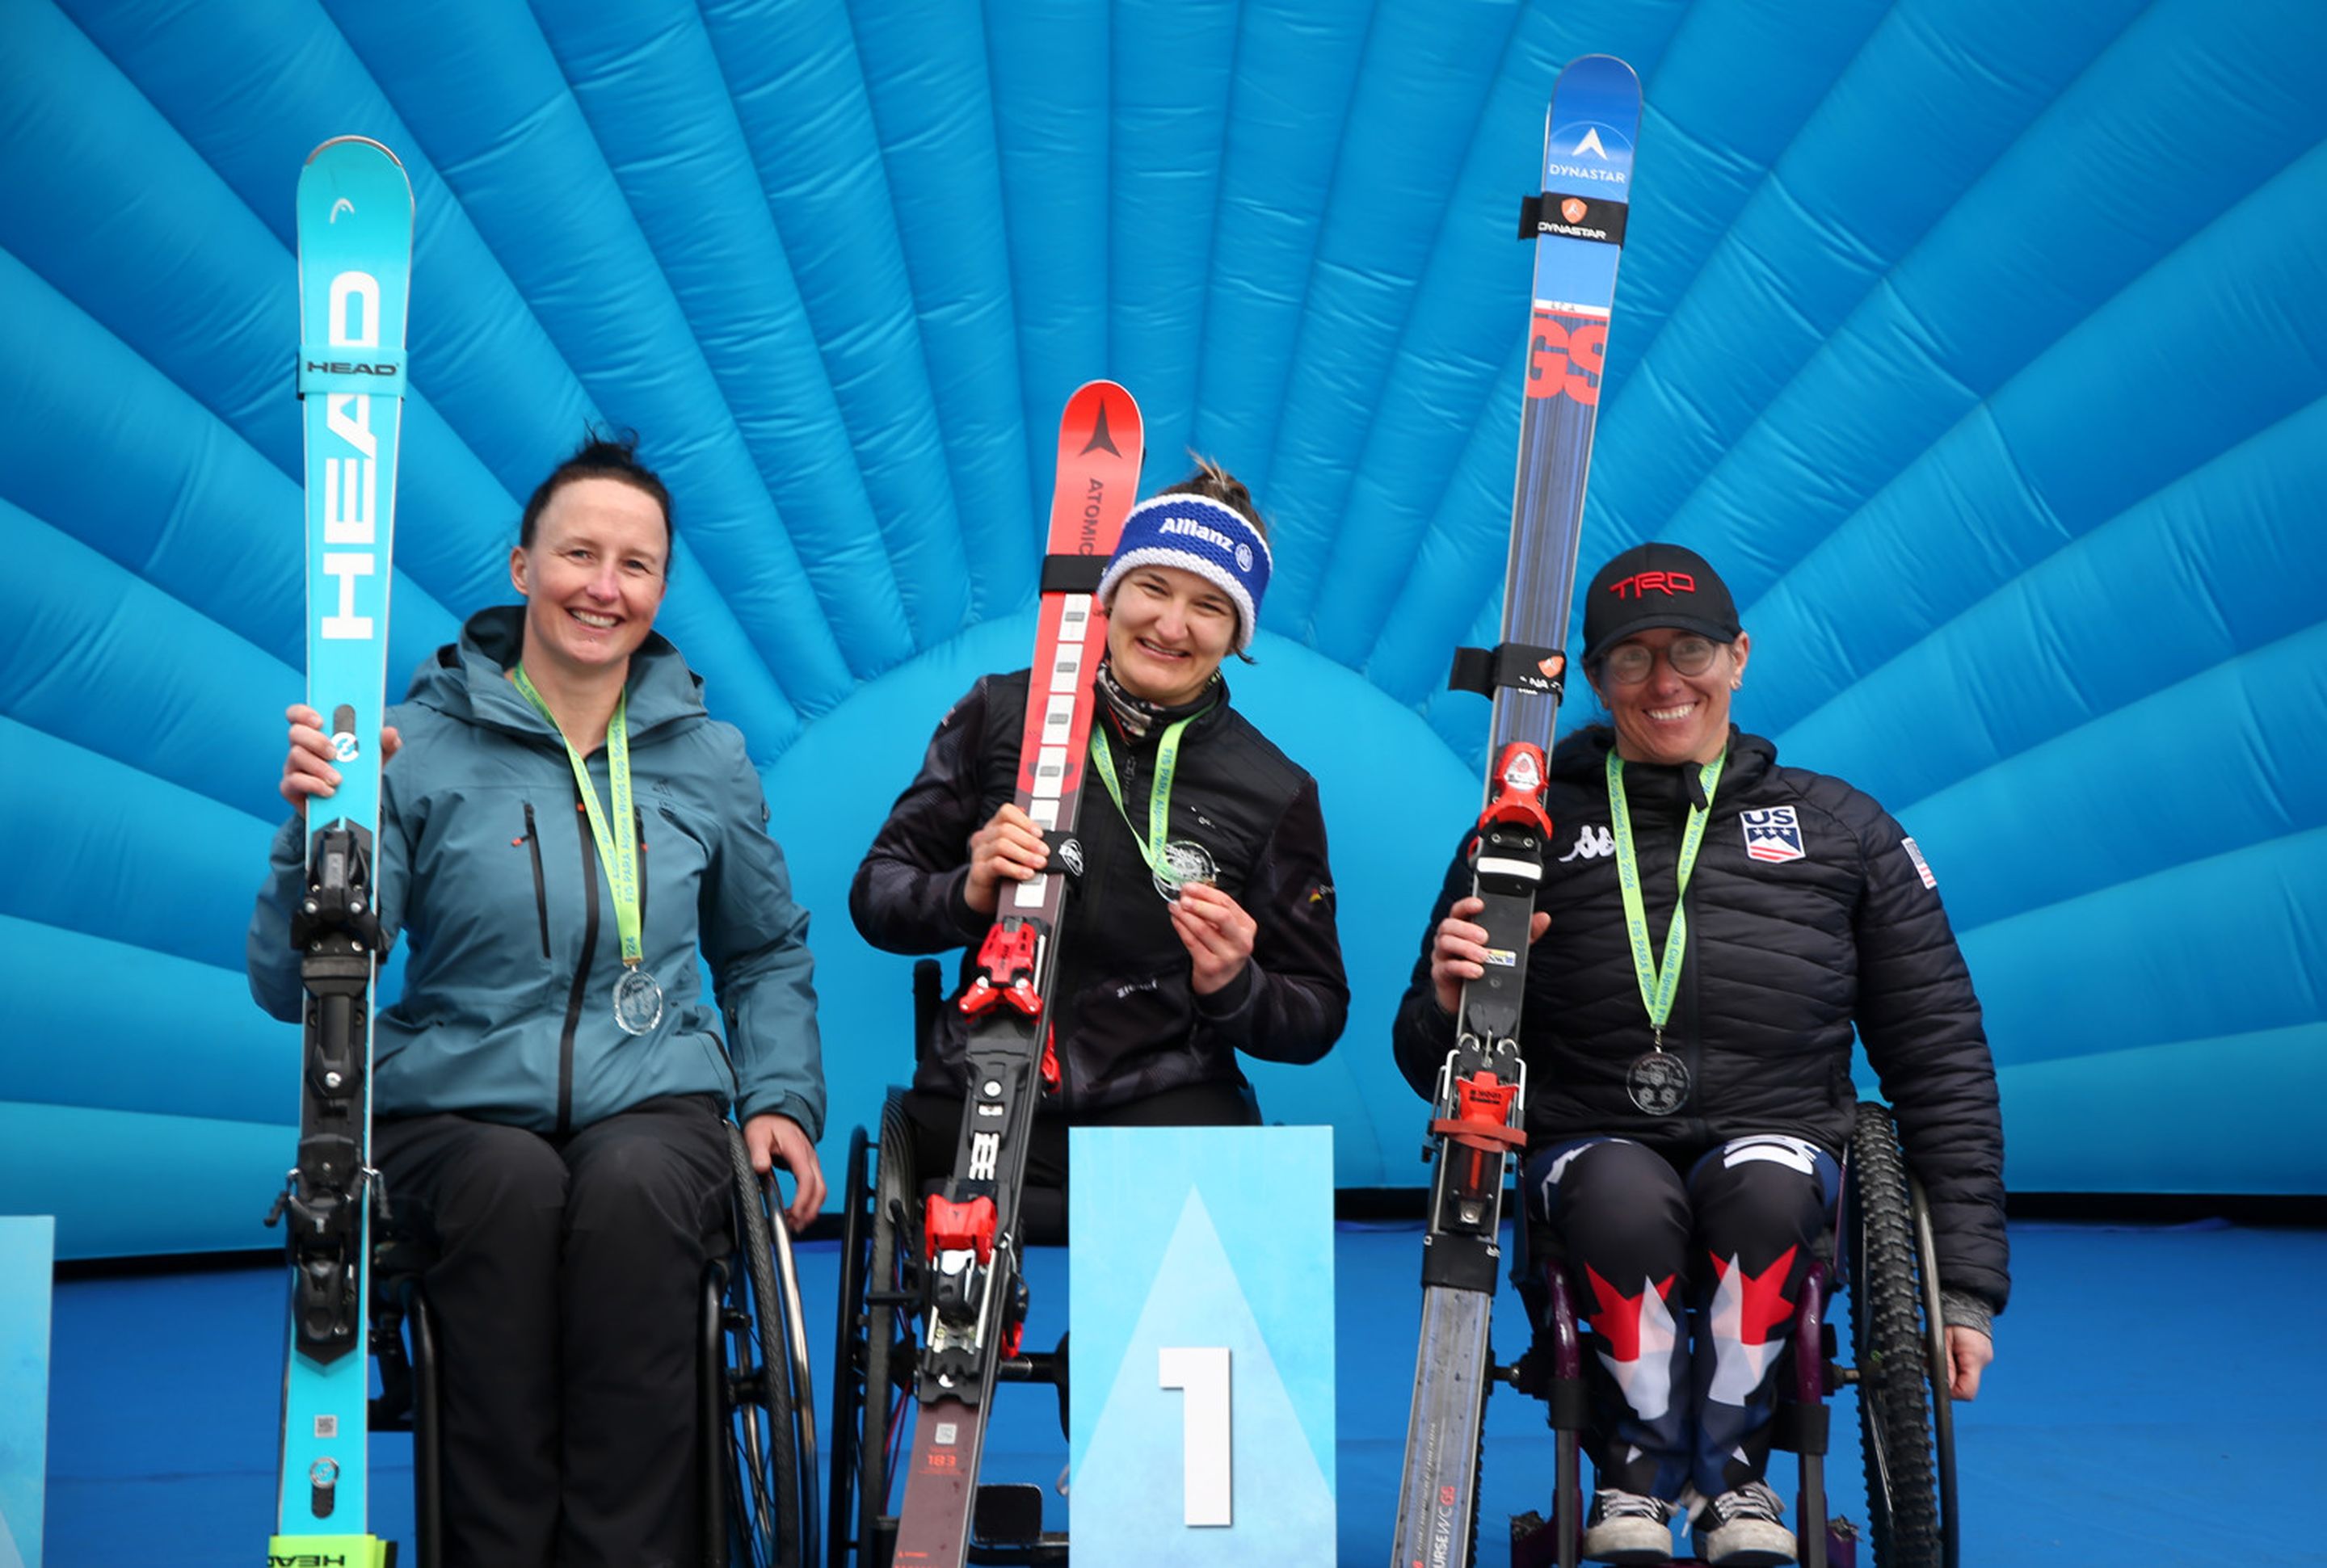 Barbara Van Bergen (NED), Anna-Lena Forster (GER) and Laurie Stephens (USA) at the medals ceremony of the first giant slalom in Sella Nevea